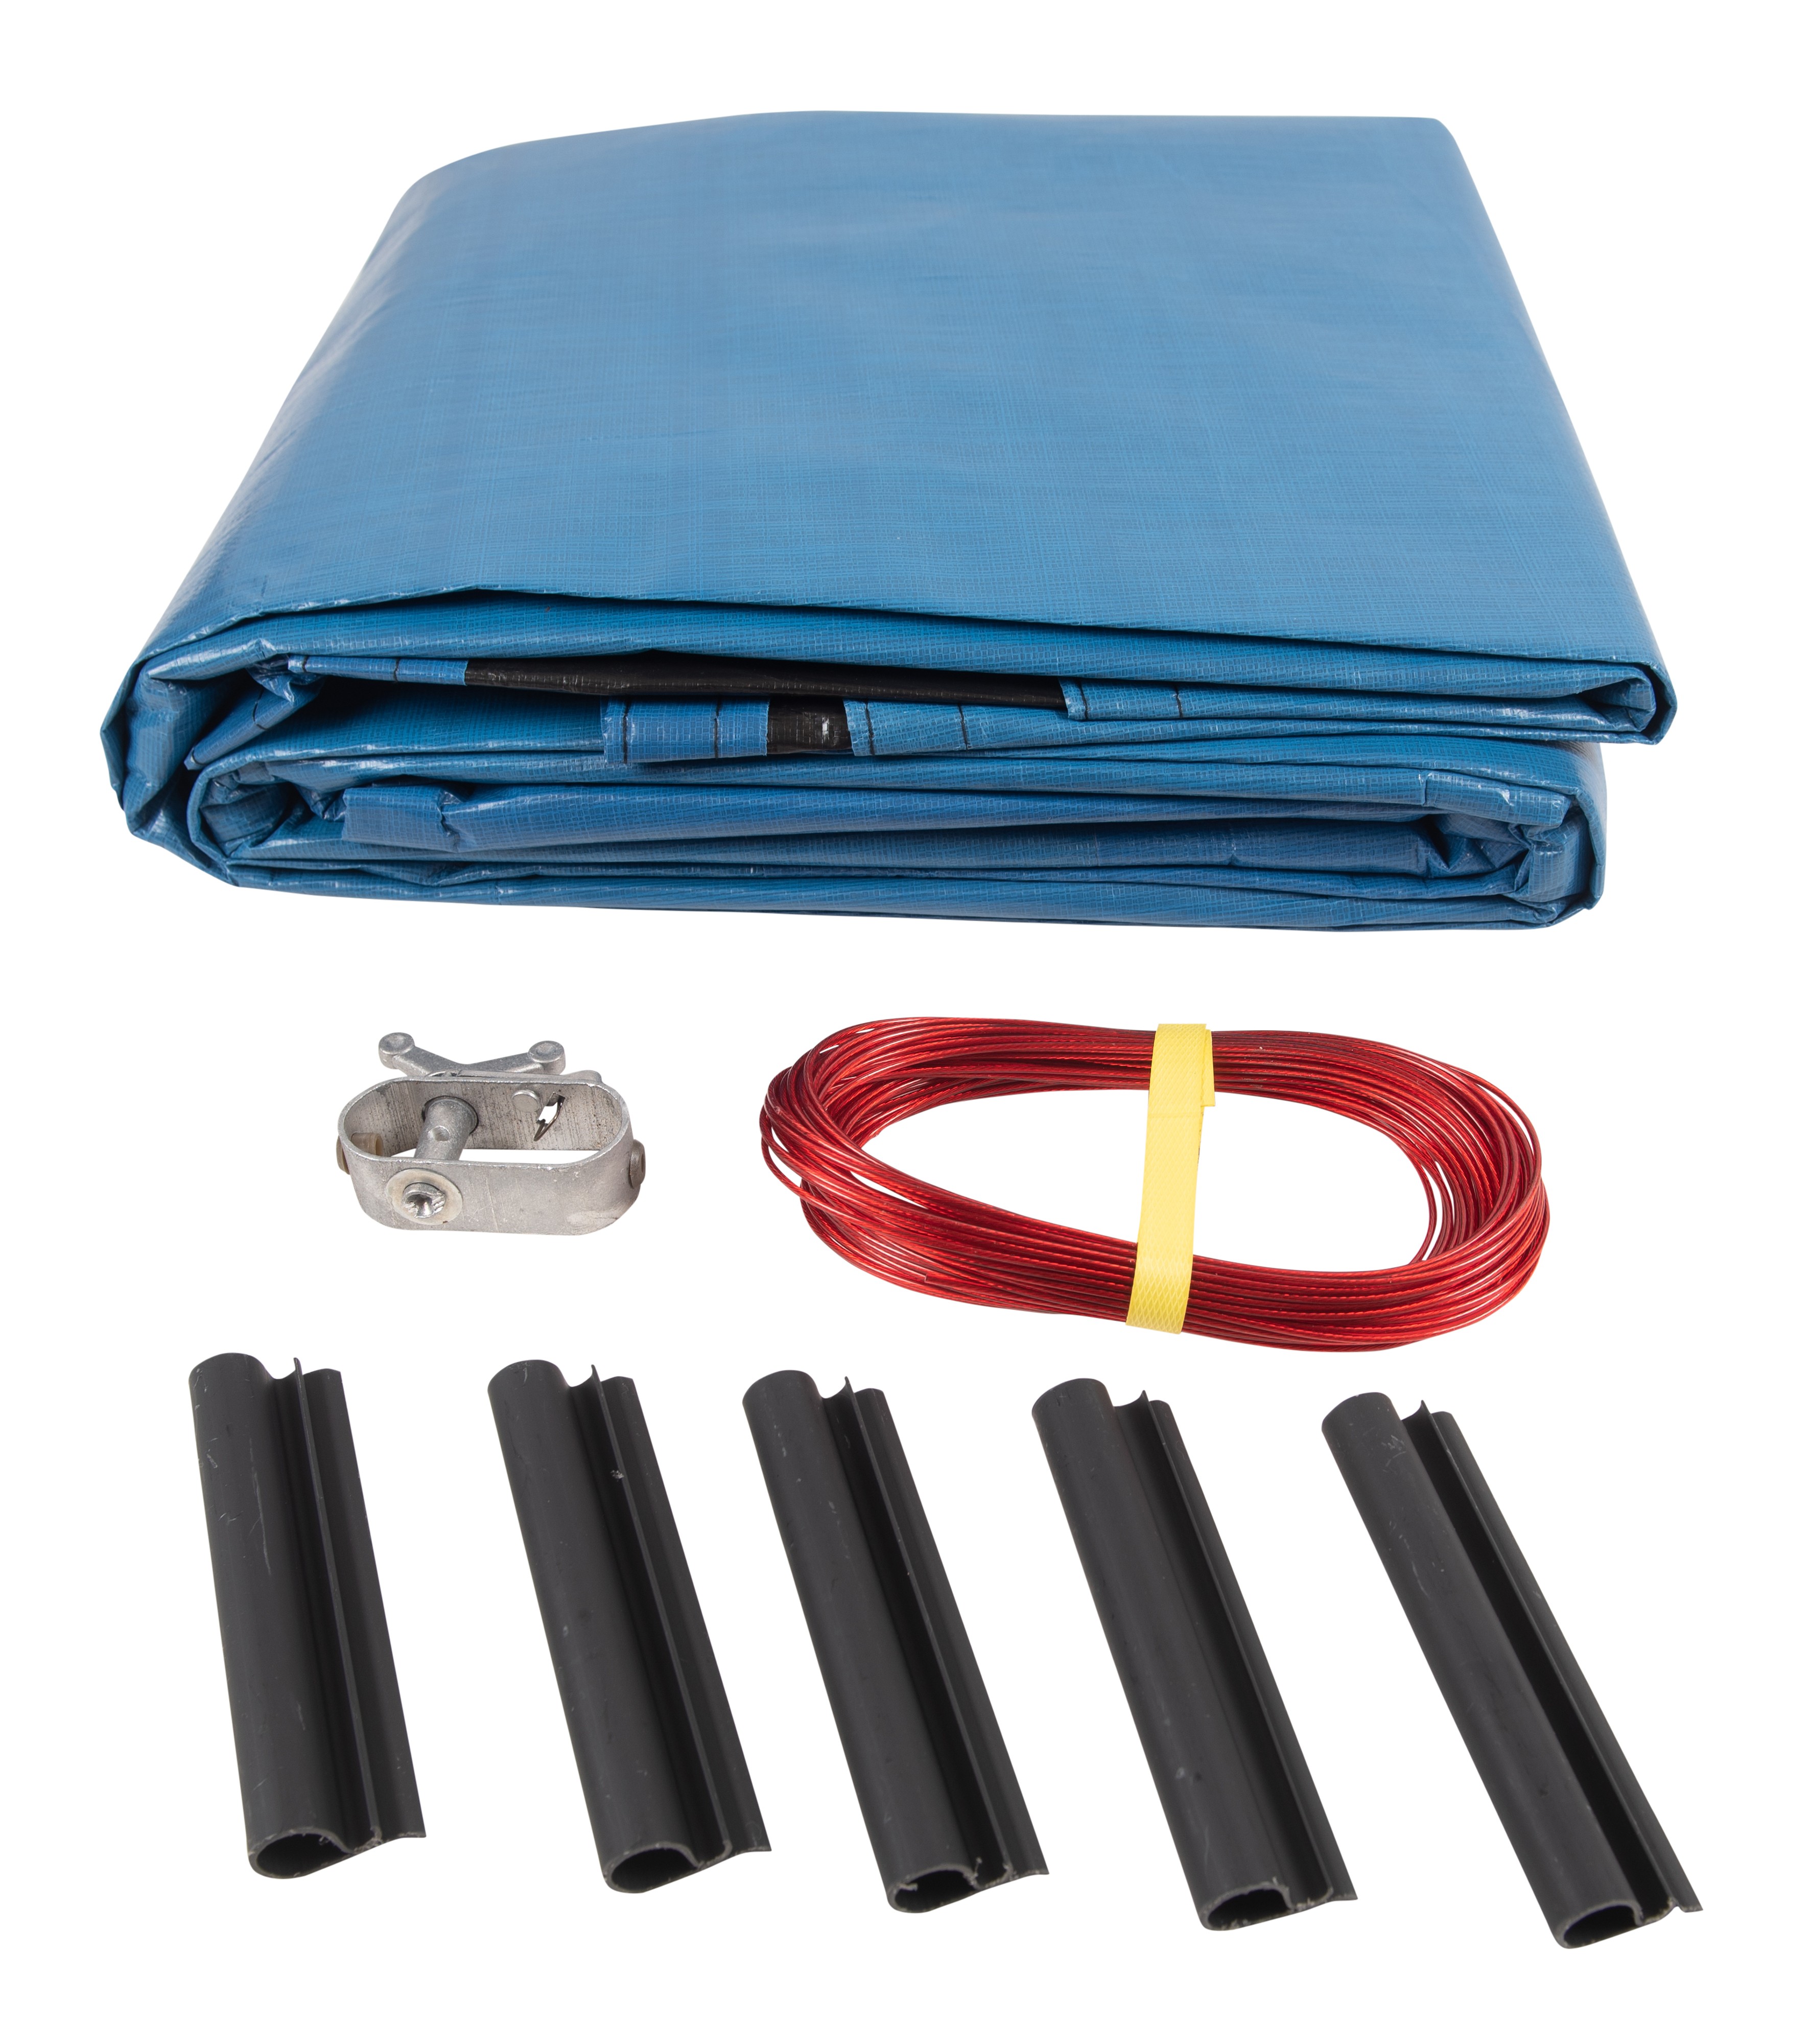 SET SunSolar Energy Technologies-  Super Duty series Above Ground Solid Pool Cover for 16x25 Foot Oval Swimming Pool - Winter Pool Cover with Sturdy Cable and Winch 15-Yr warranty. Cover Clips Included.